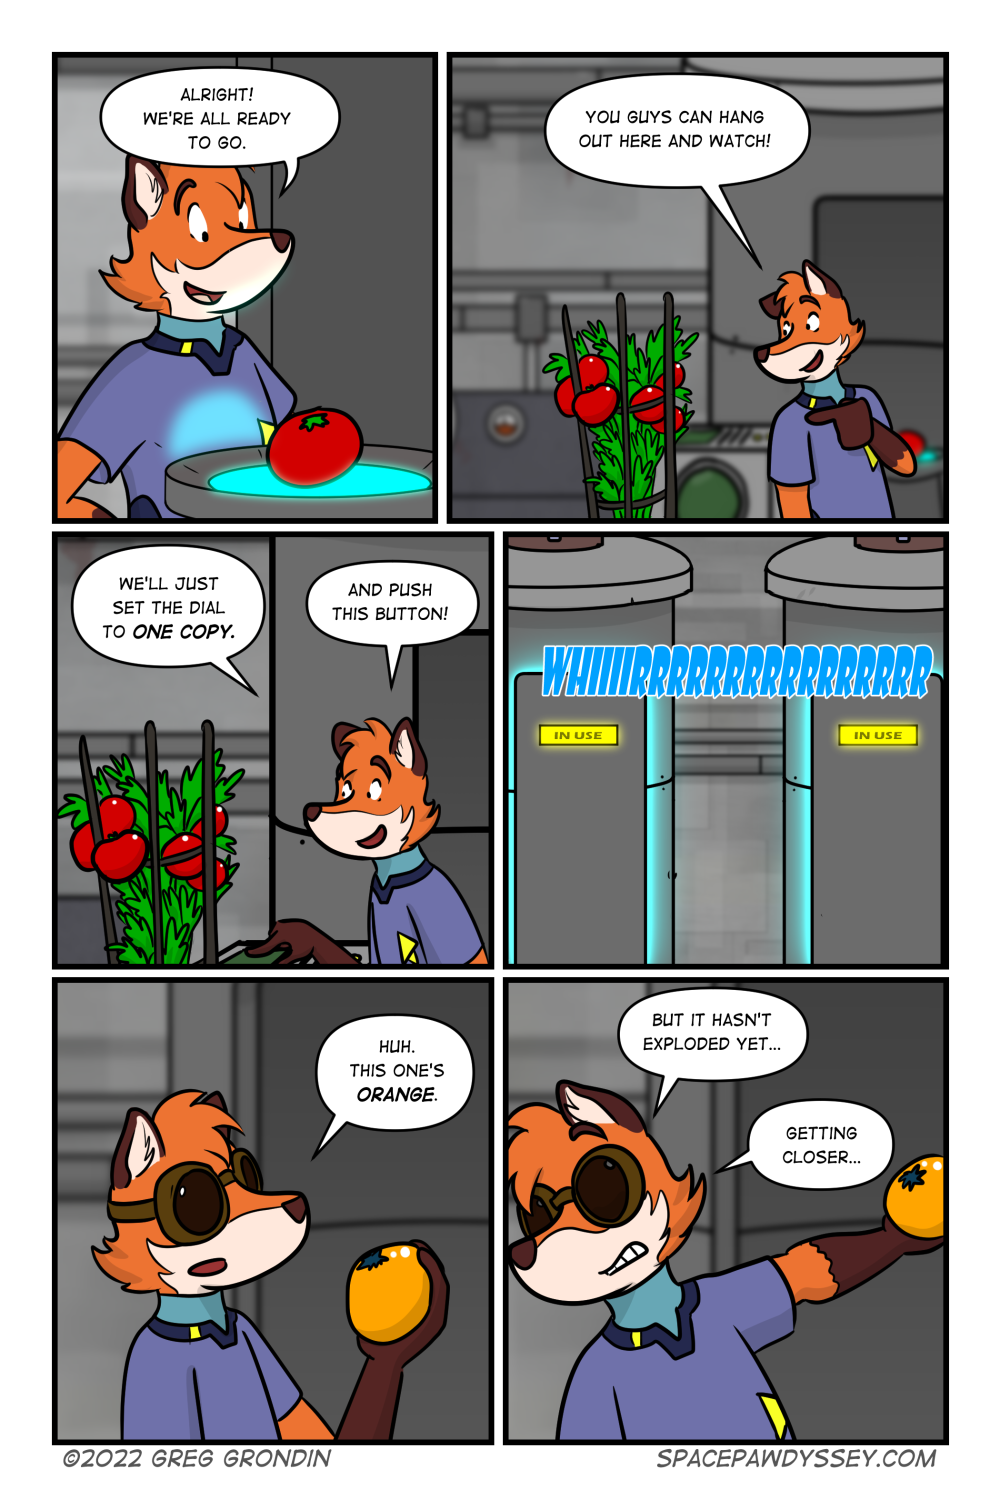 Space Pawdyssey #590